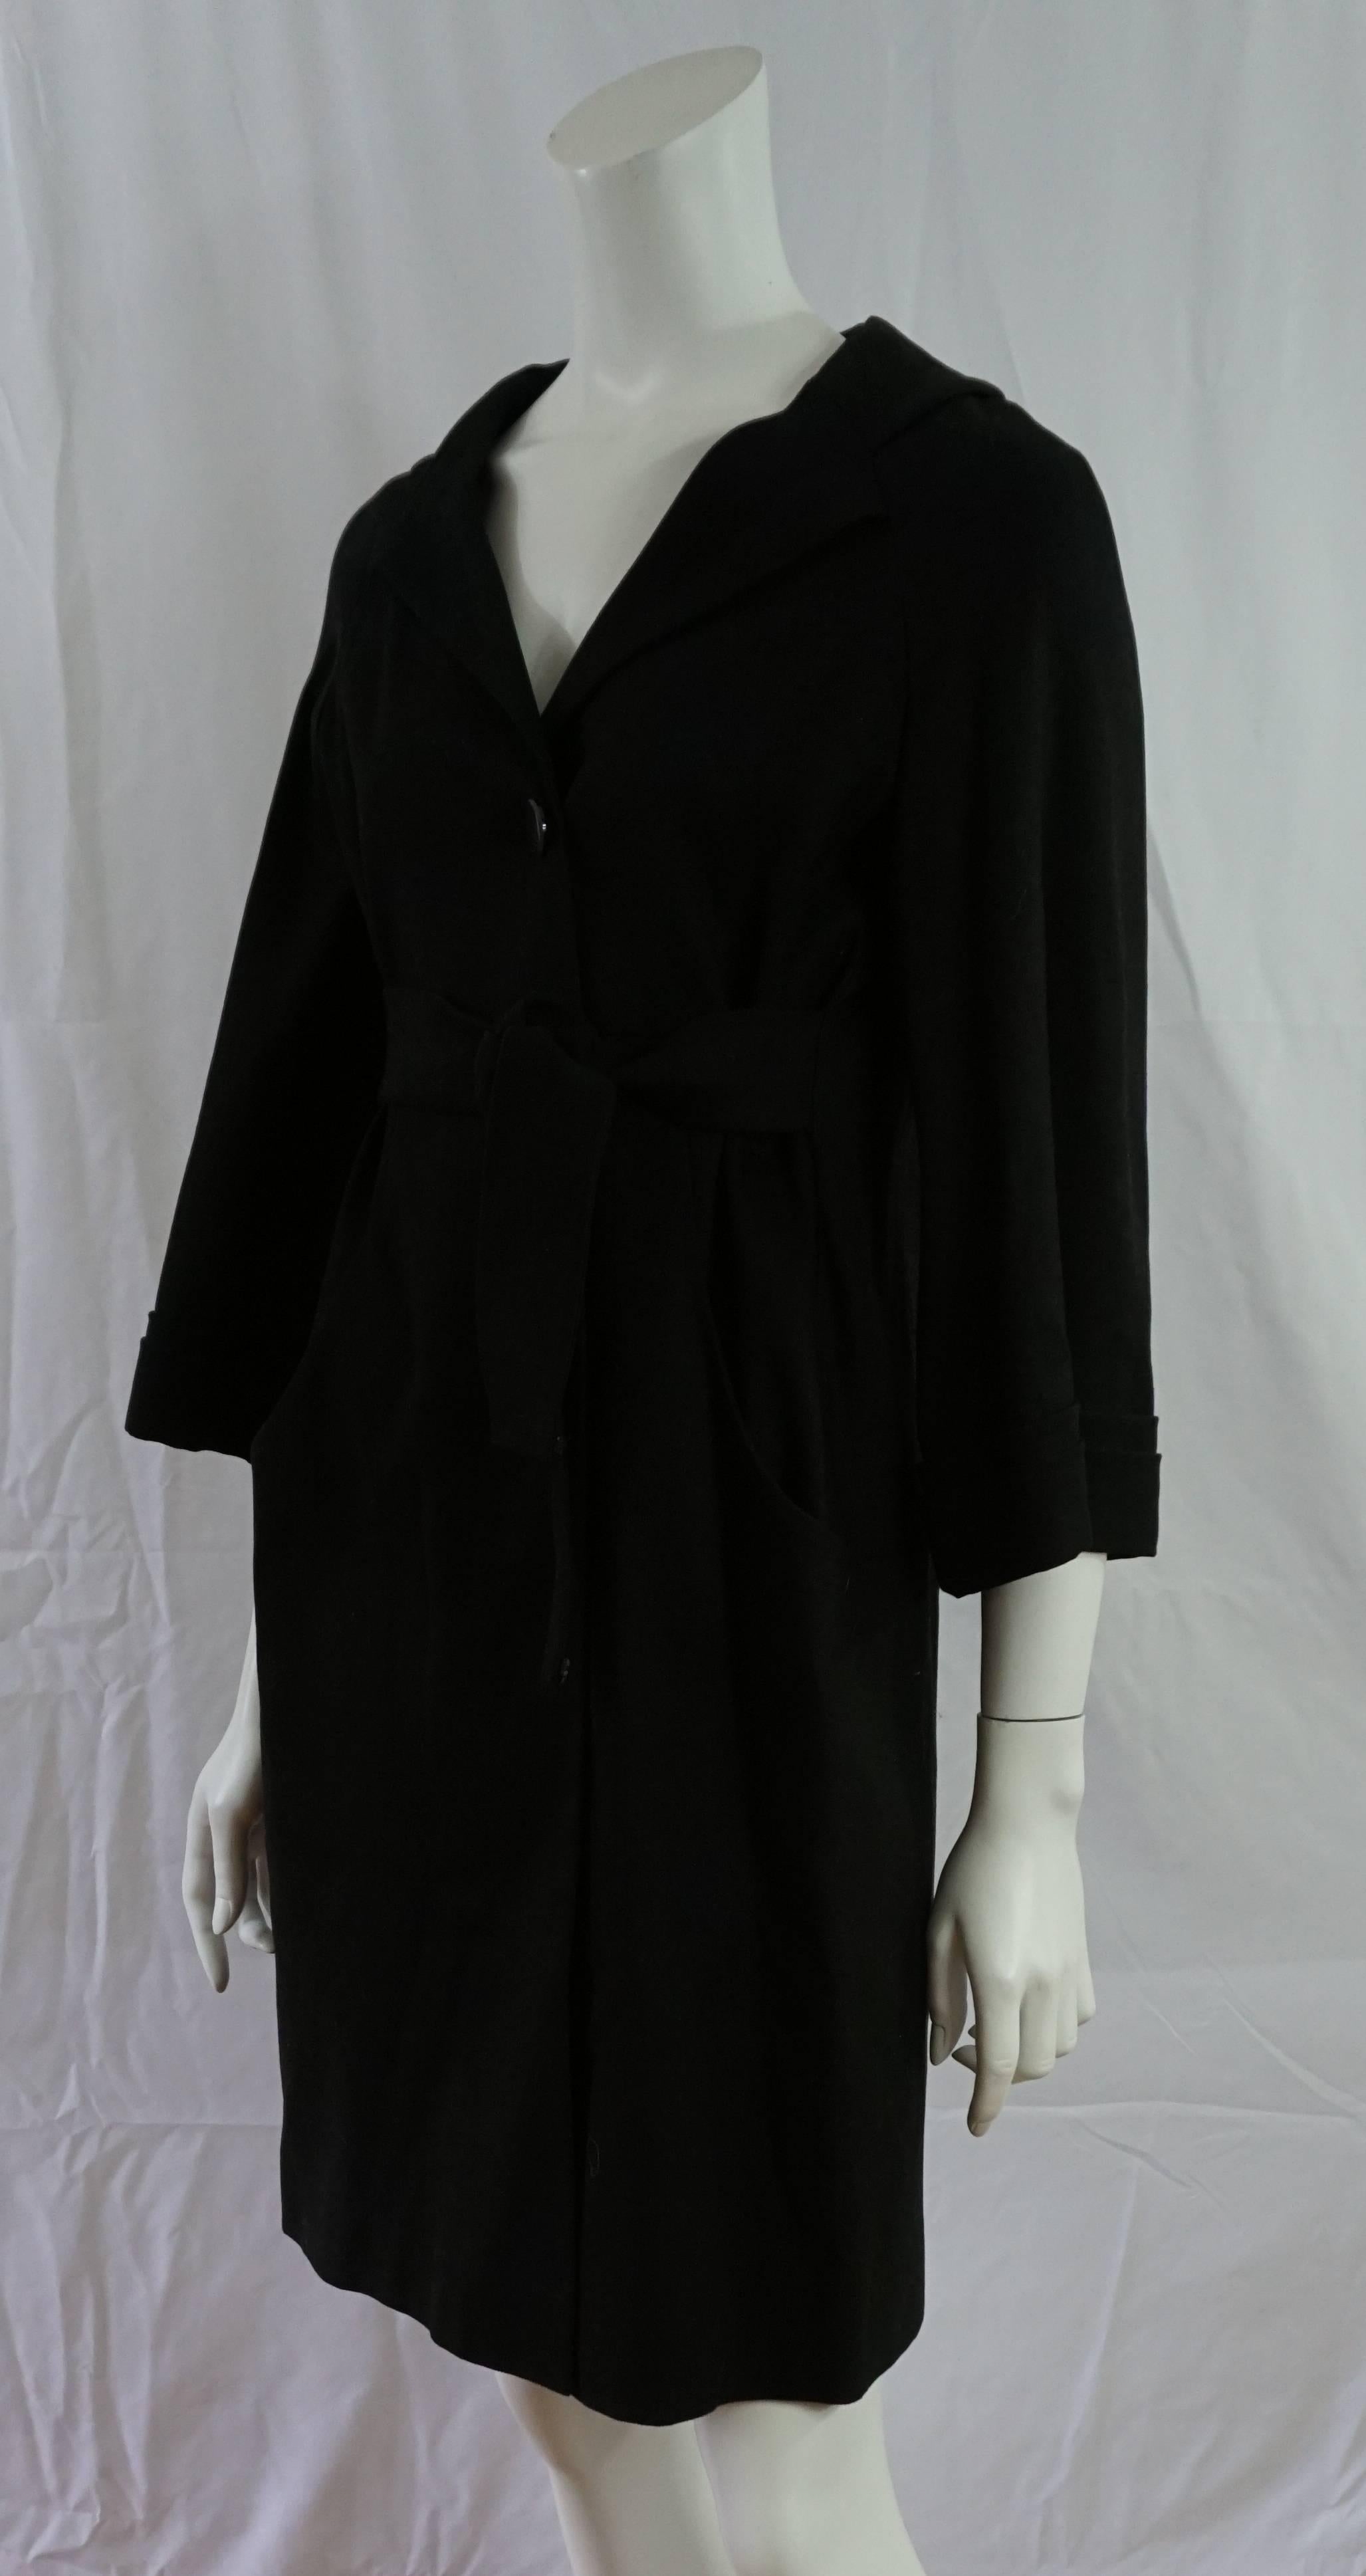 Gucci Black Coat Dress - 42 - NWT  This beautiful coat dress is made of a Hemp blend, has a 3/4 sleeve, ties at the waist and has 3 Gucci Logo buttons. The sleeves have a cuff, 2 pockets. NWT. 
Measurements:
Bust 35"
Shoulder to Shoulder